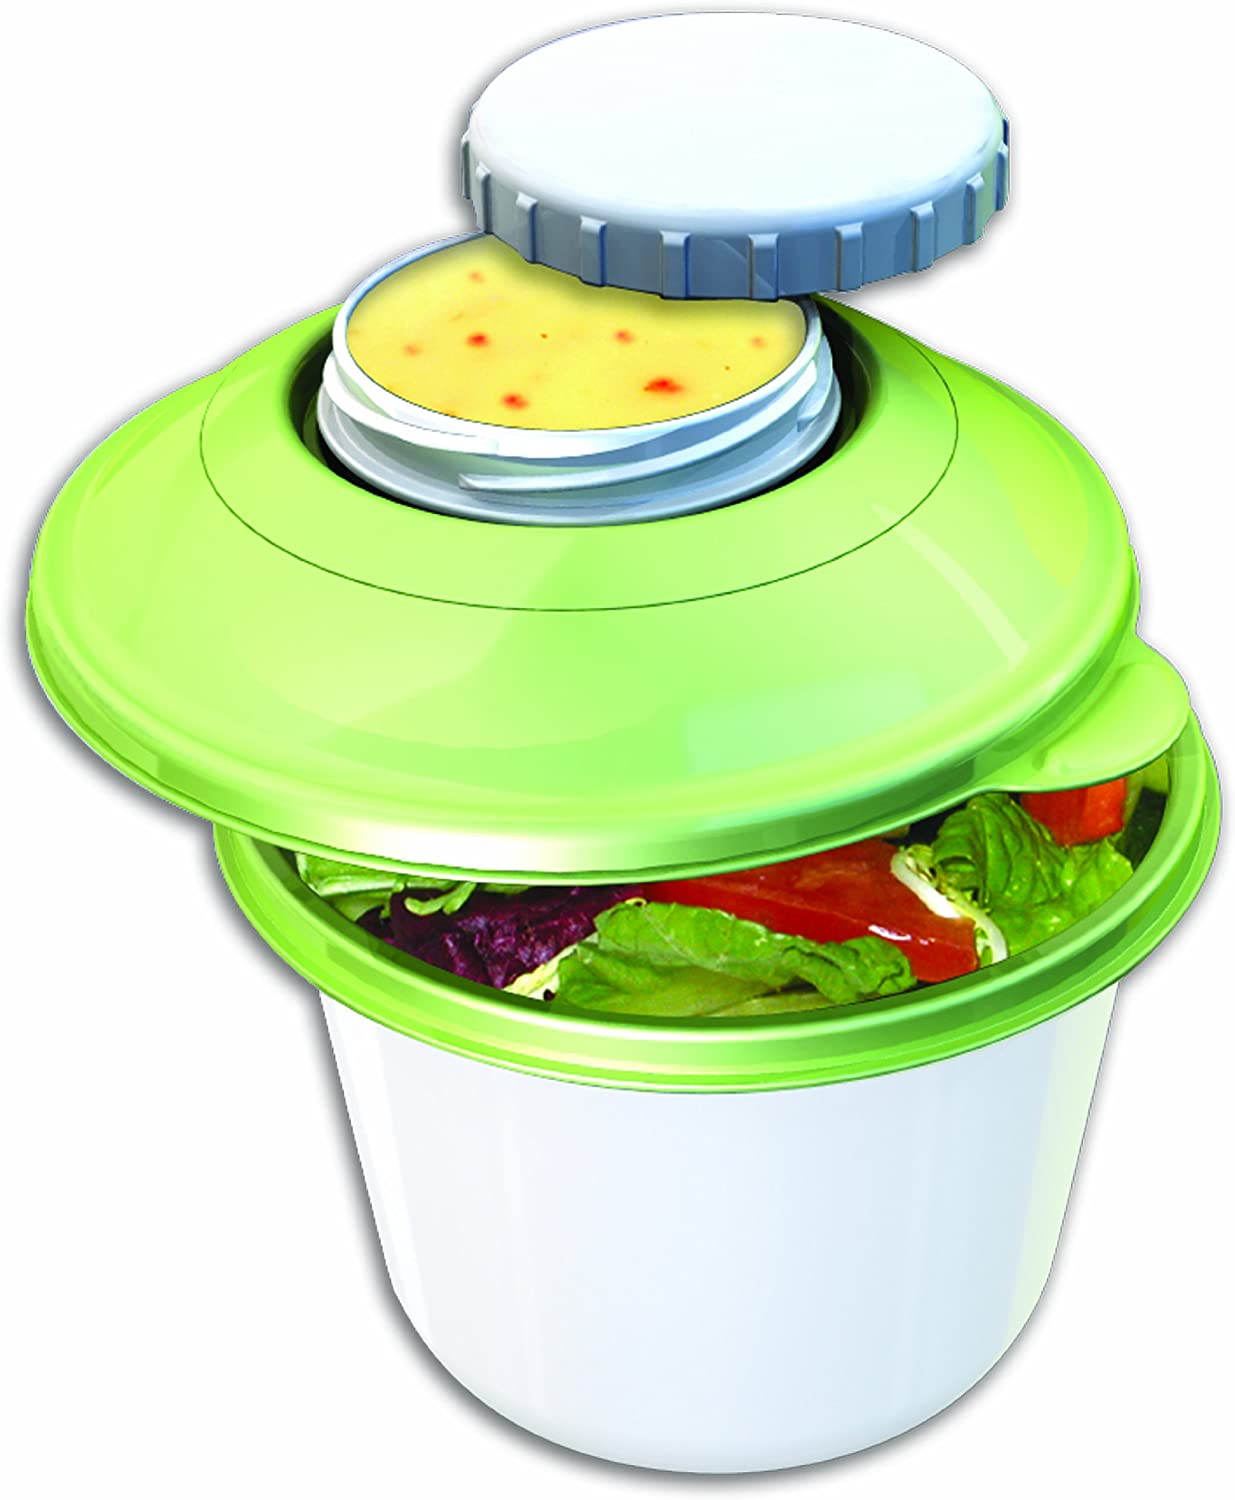 Stay Fit Ez-Freeze Salad Kit On The Go